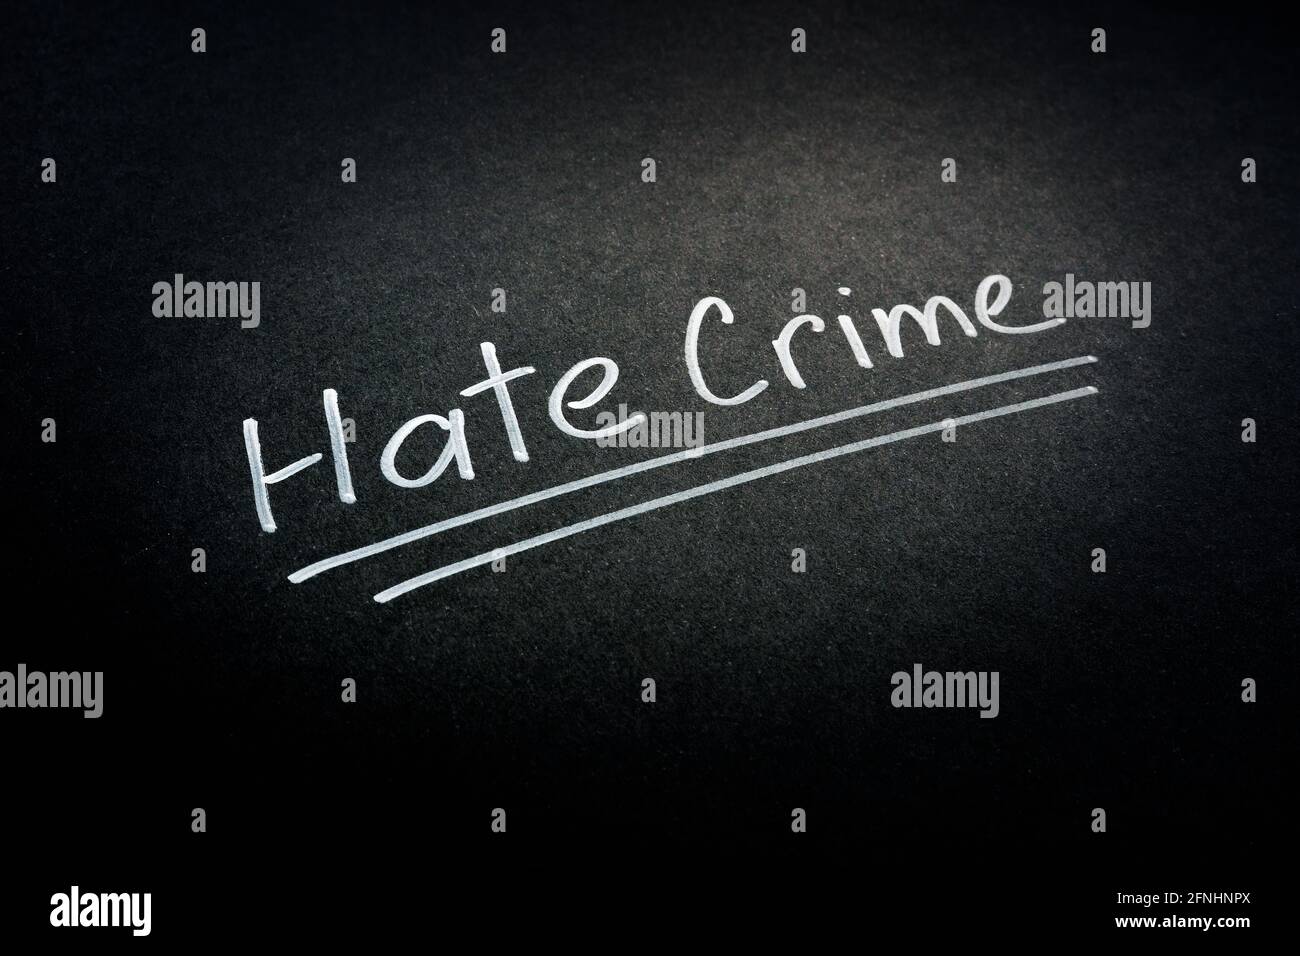 Hate crime words on the dark surface. Stock Photo